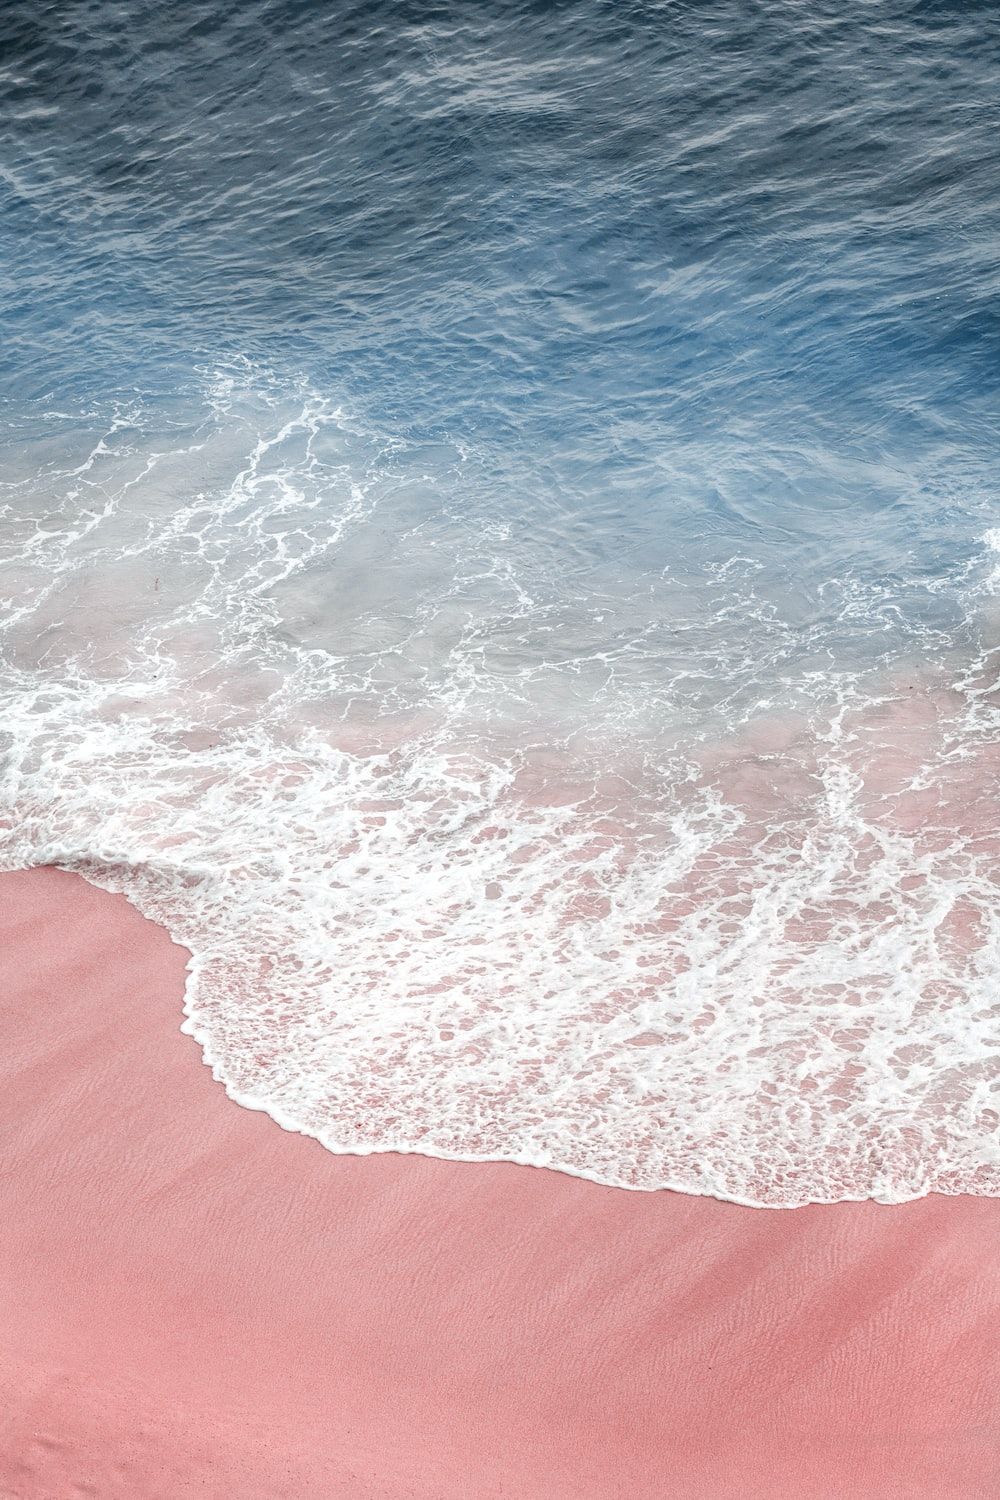 A pink and blue beach with waves crashing - Beach